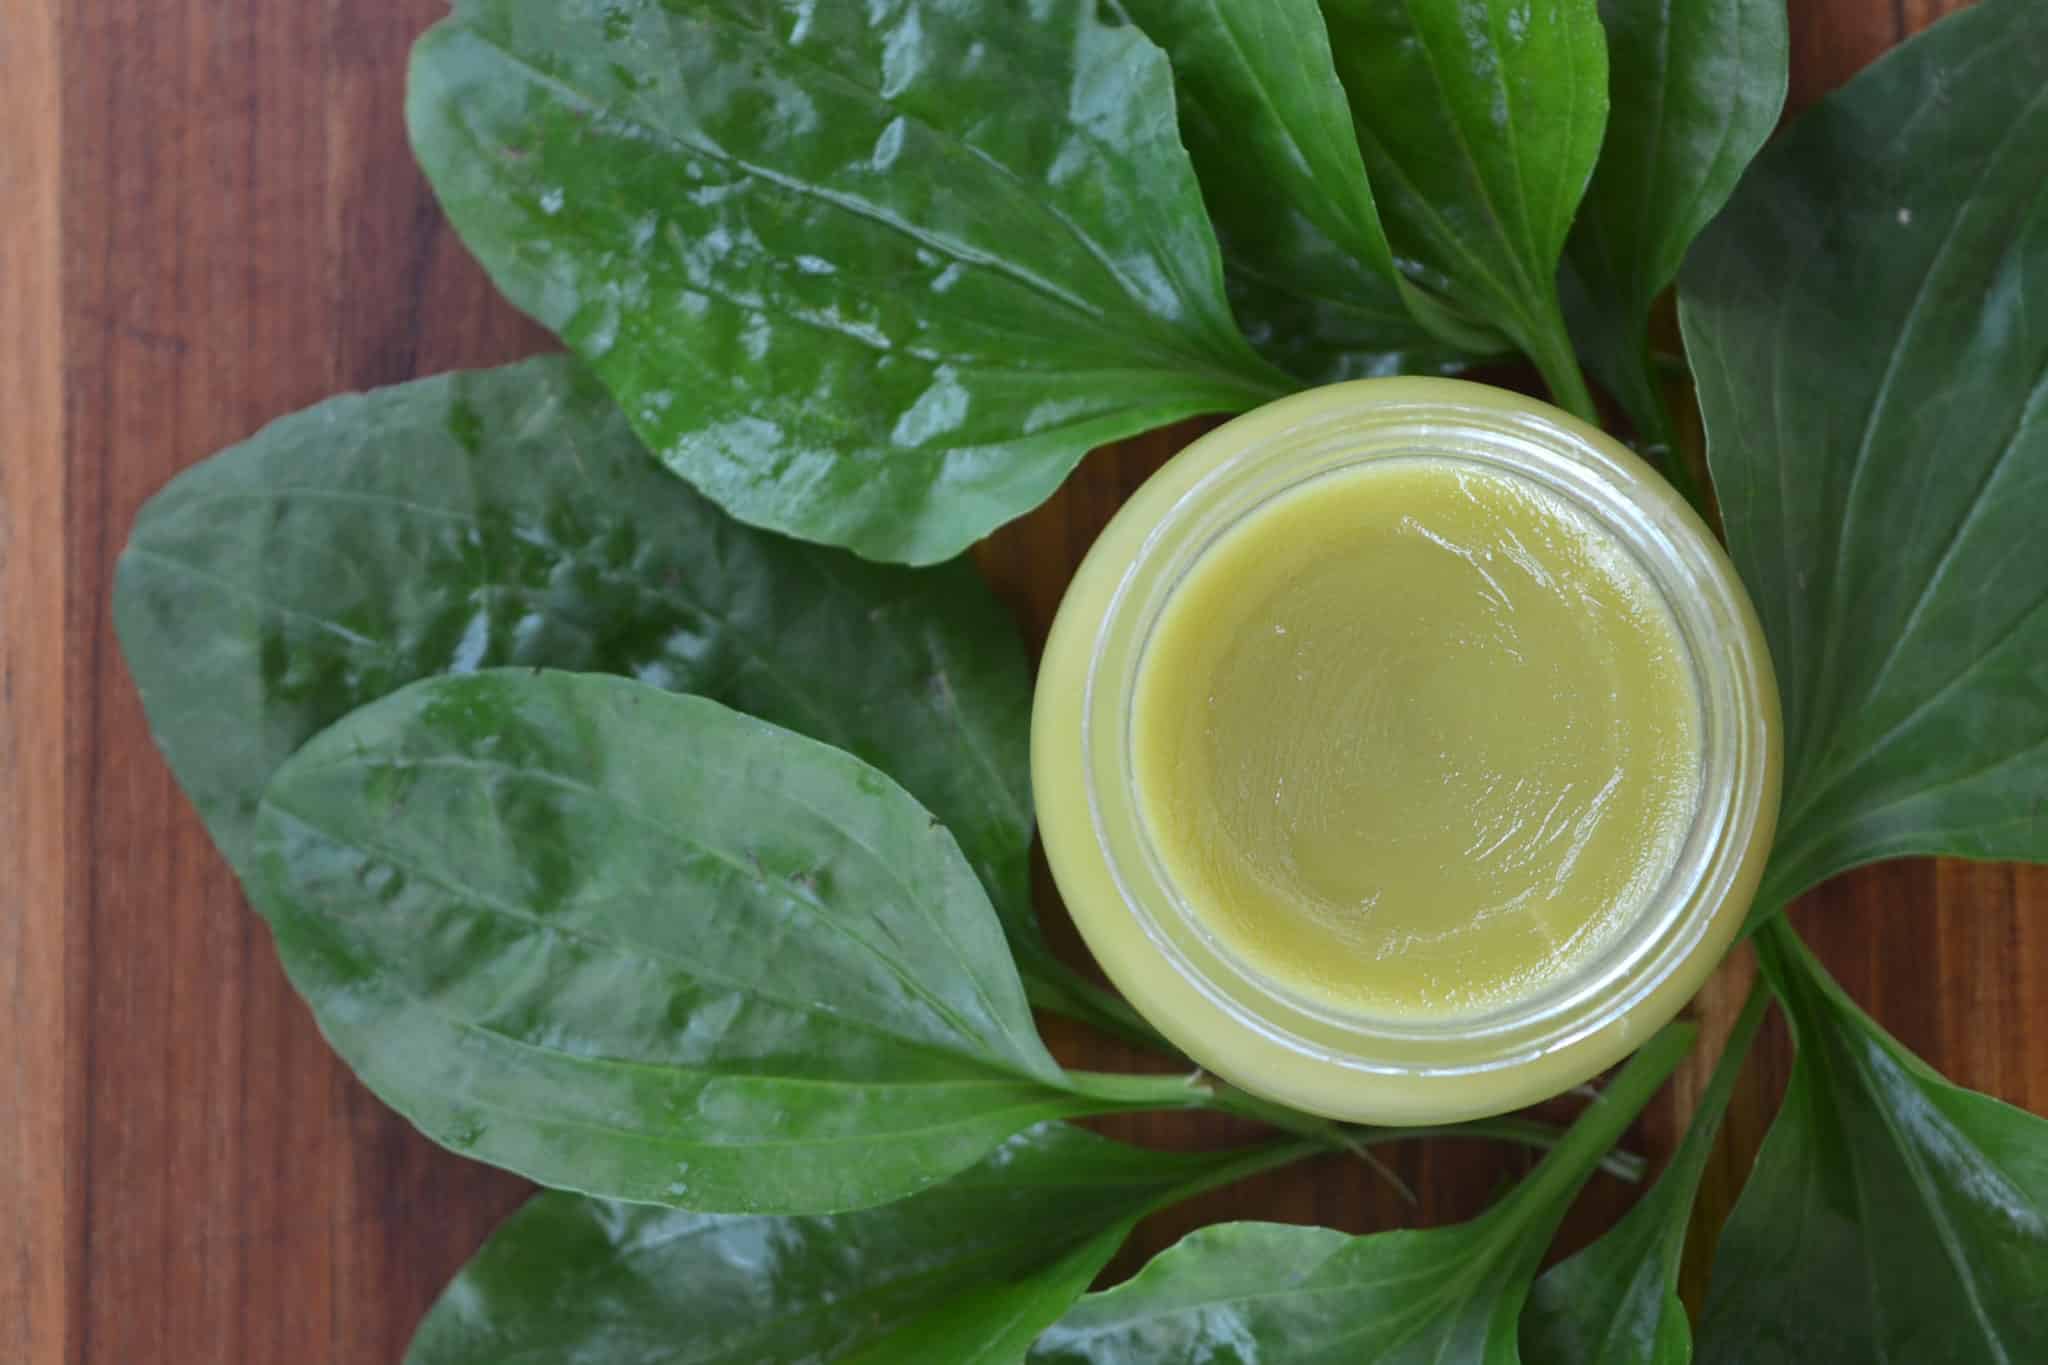 plantain salve and leaves